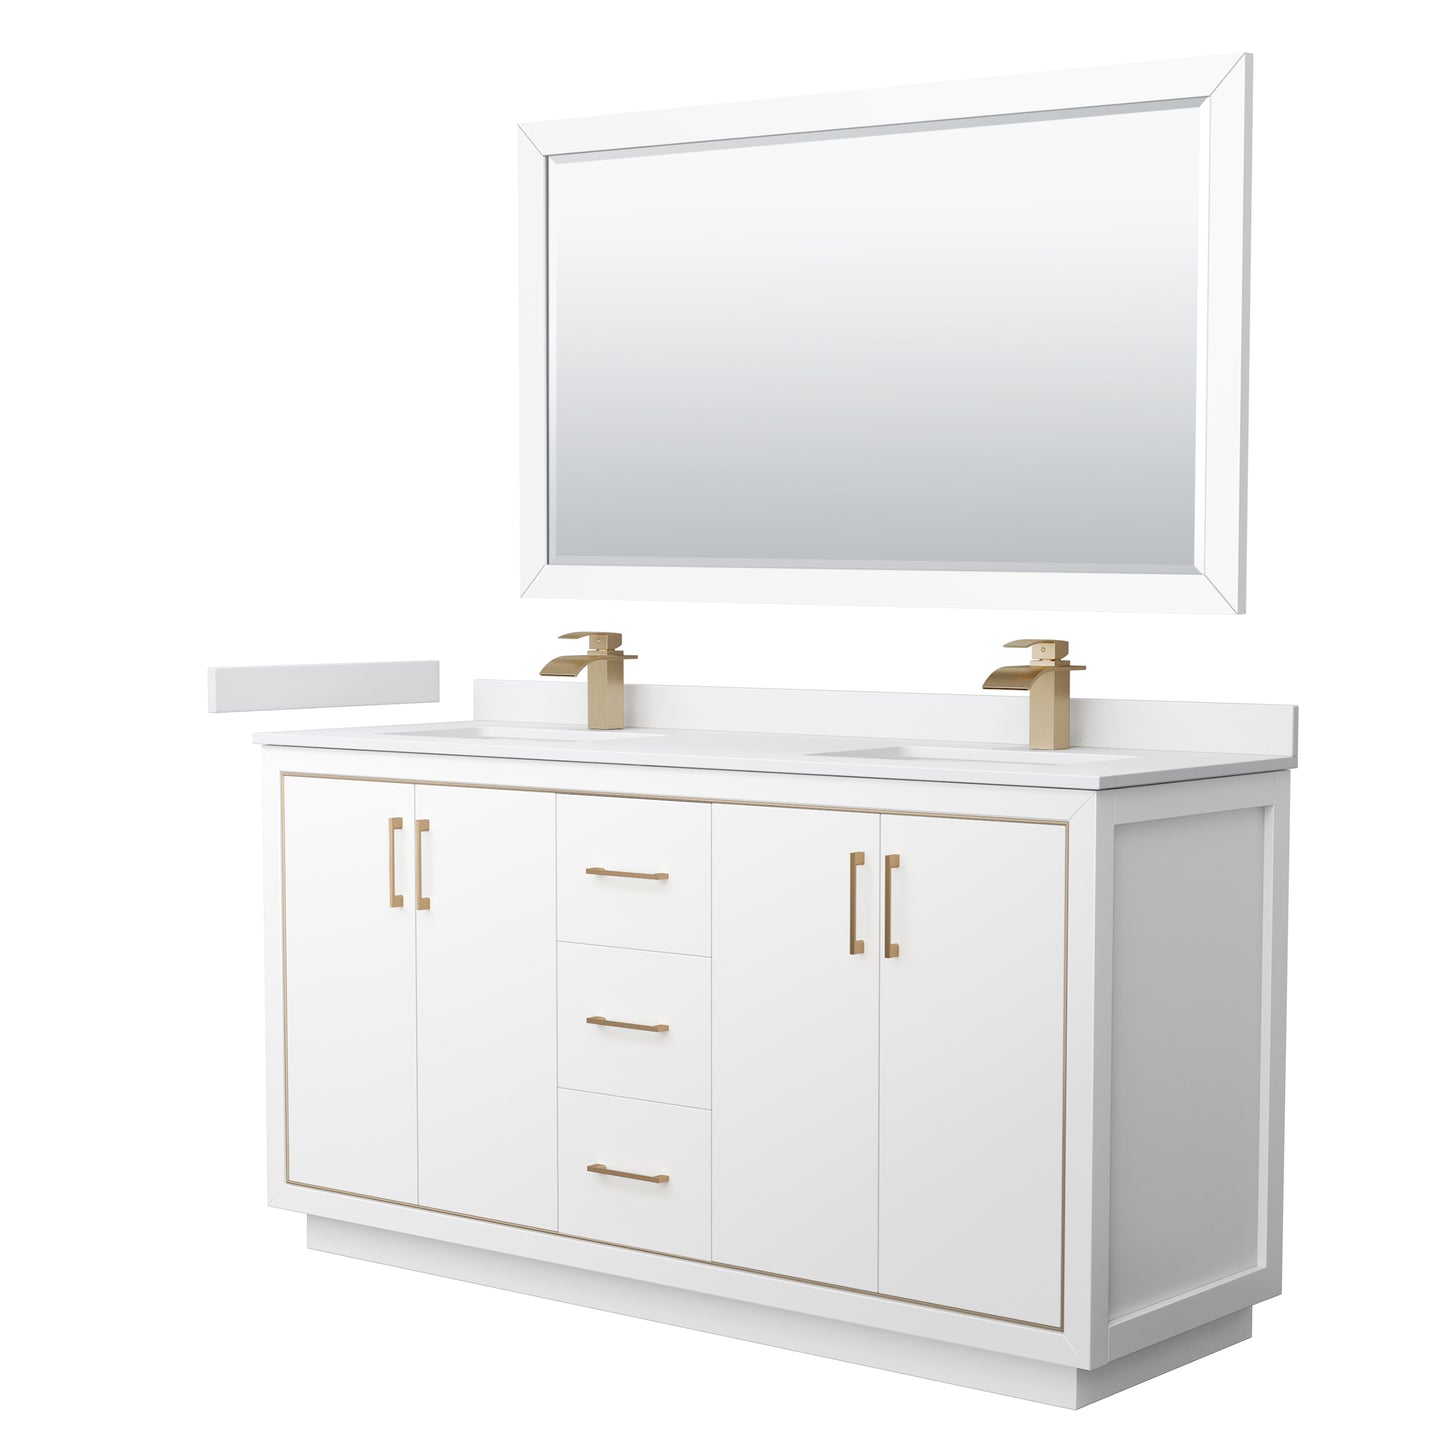 Wyndham Icon 66 Inch Double Bathroom Vanity in White with White Cultured Marble Countertop, Undermount Square Sinks, Satin Bronze Trim and 58 Inch Mirror - Luxe Bathroom Vanities